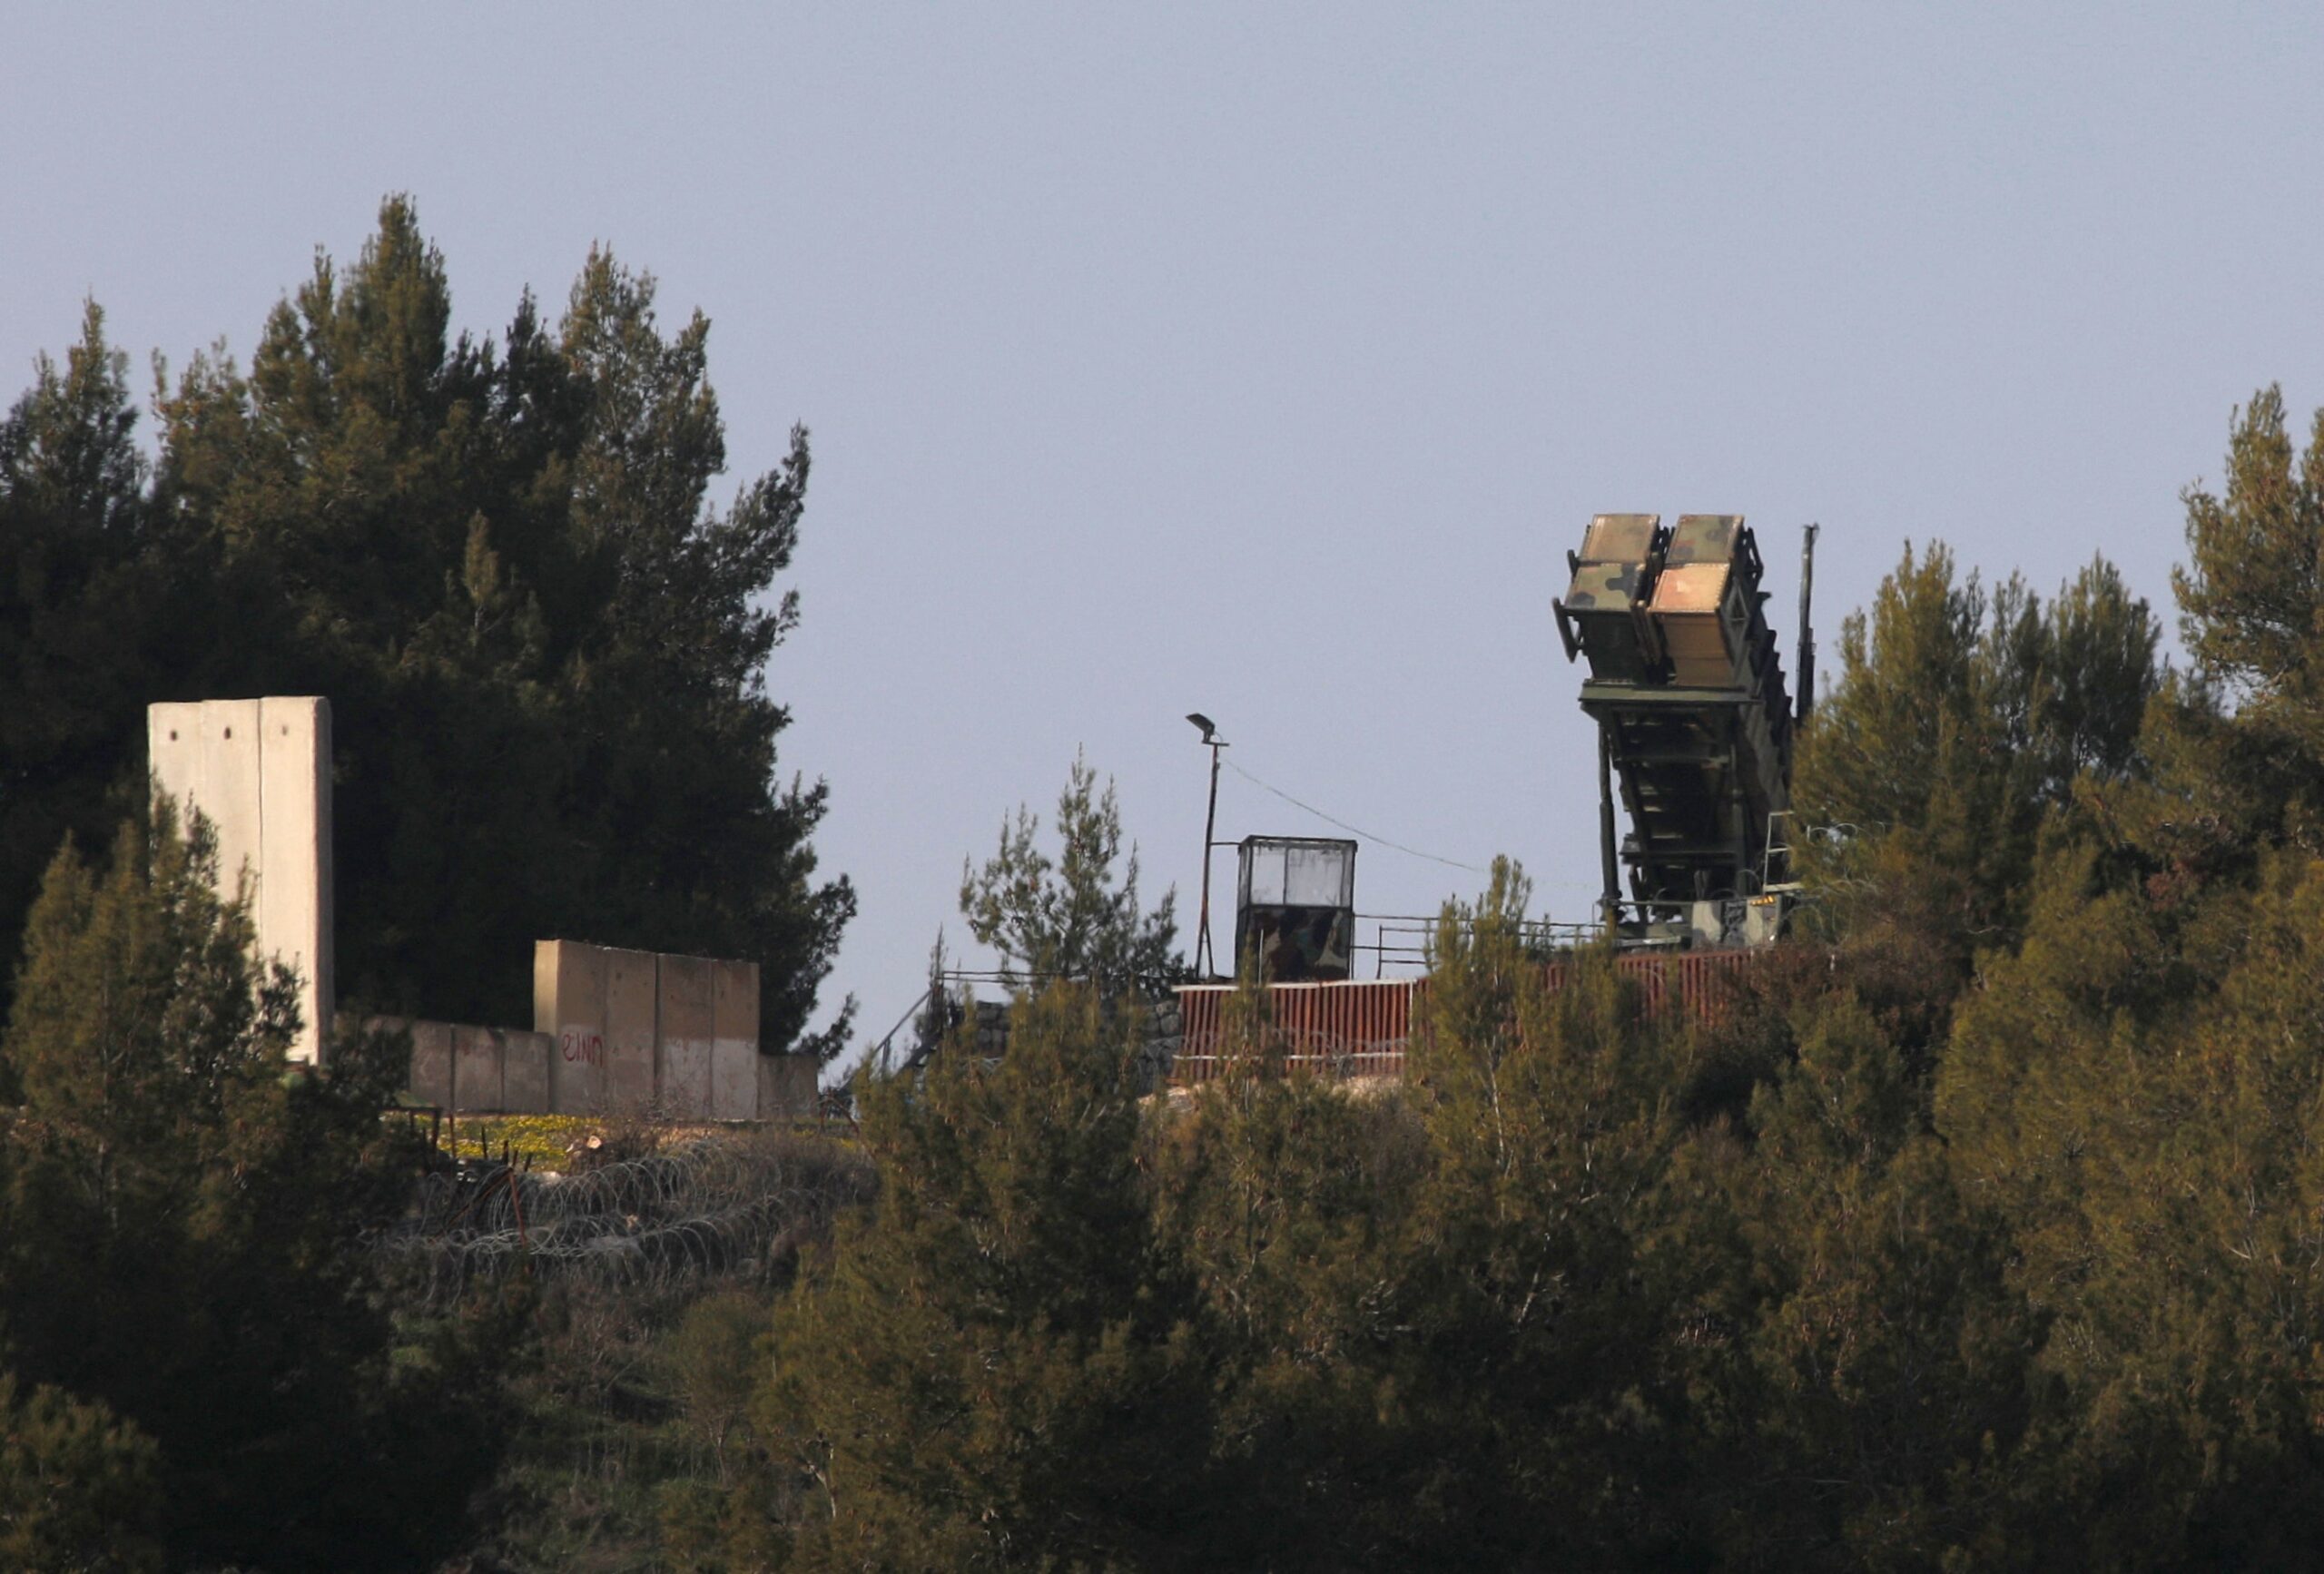 The IDF is mothballing its Patriot air defense systems, like this one seen on the border with Lebanon. (Photo by JALAA MAREY/AFP via Getty Images)